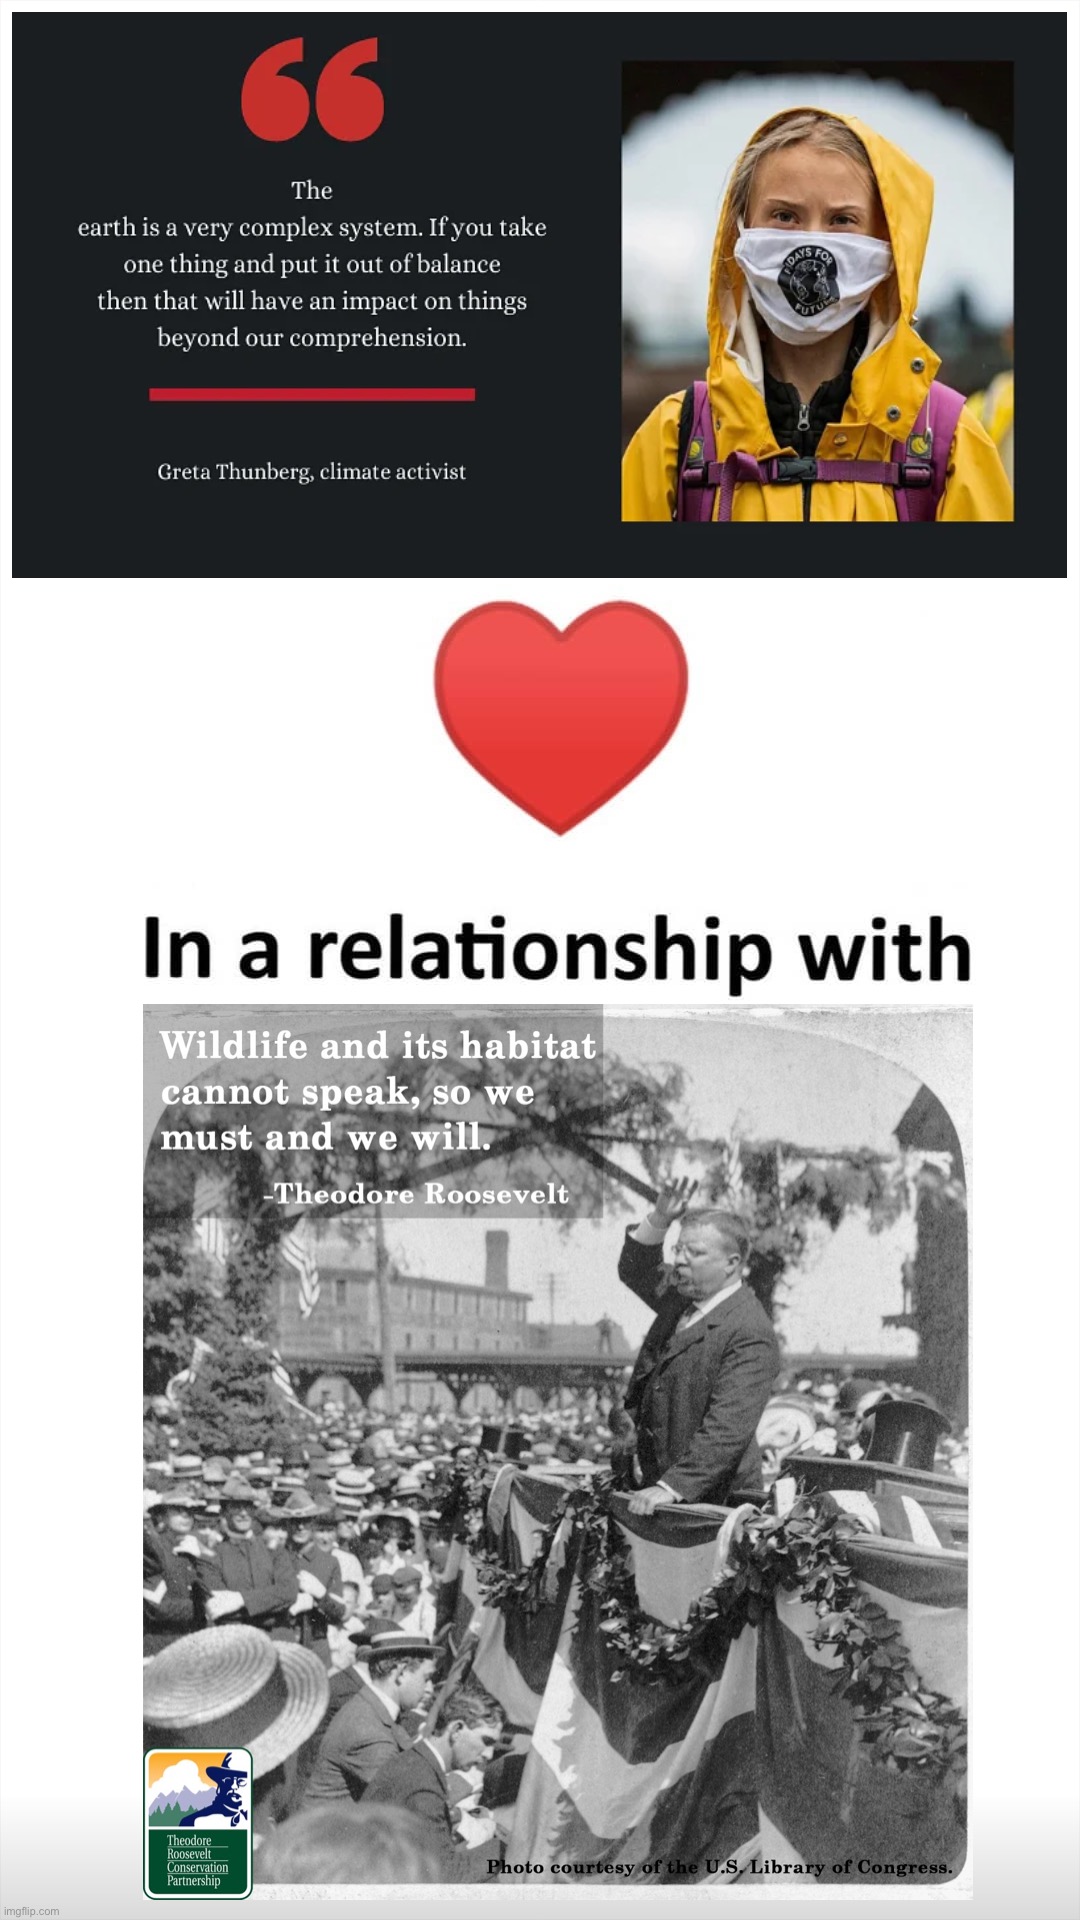 Greta X Teddy | image tagged in in a relationship with,greta,teddy roosevelt,environment,environmental,shipping | made w/ Imgflip meme maker